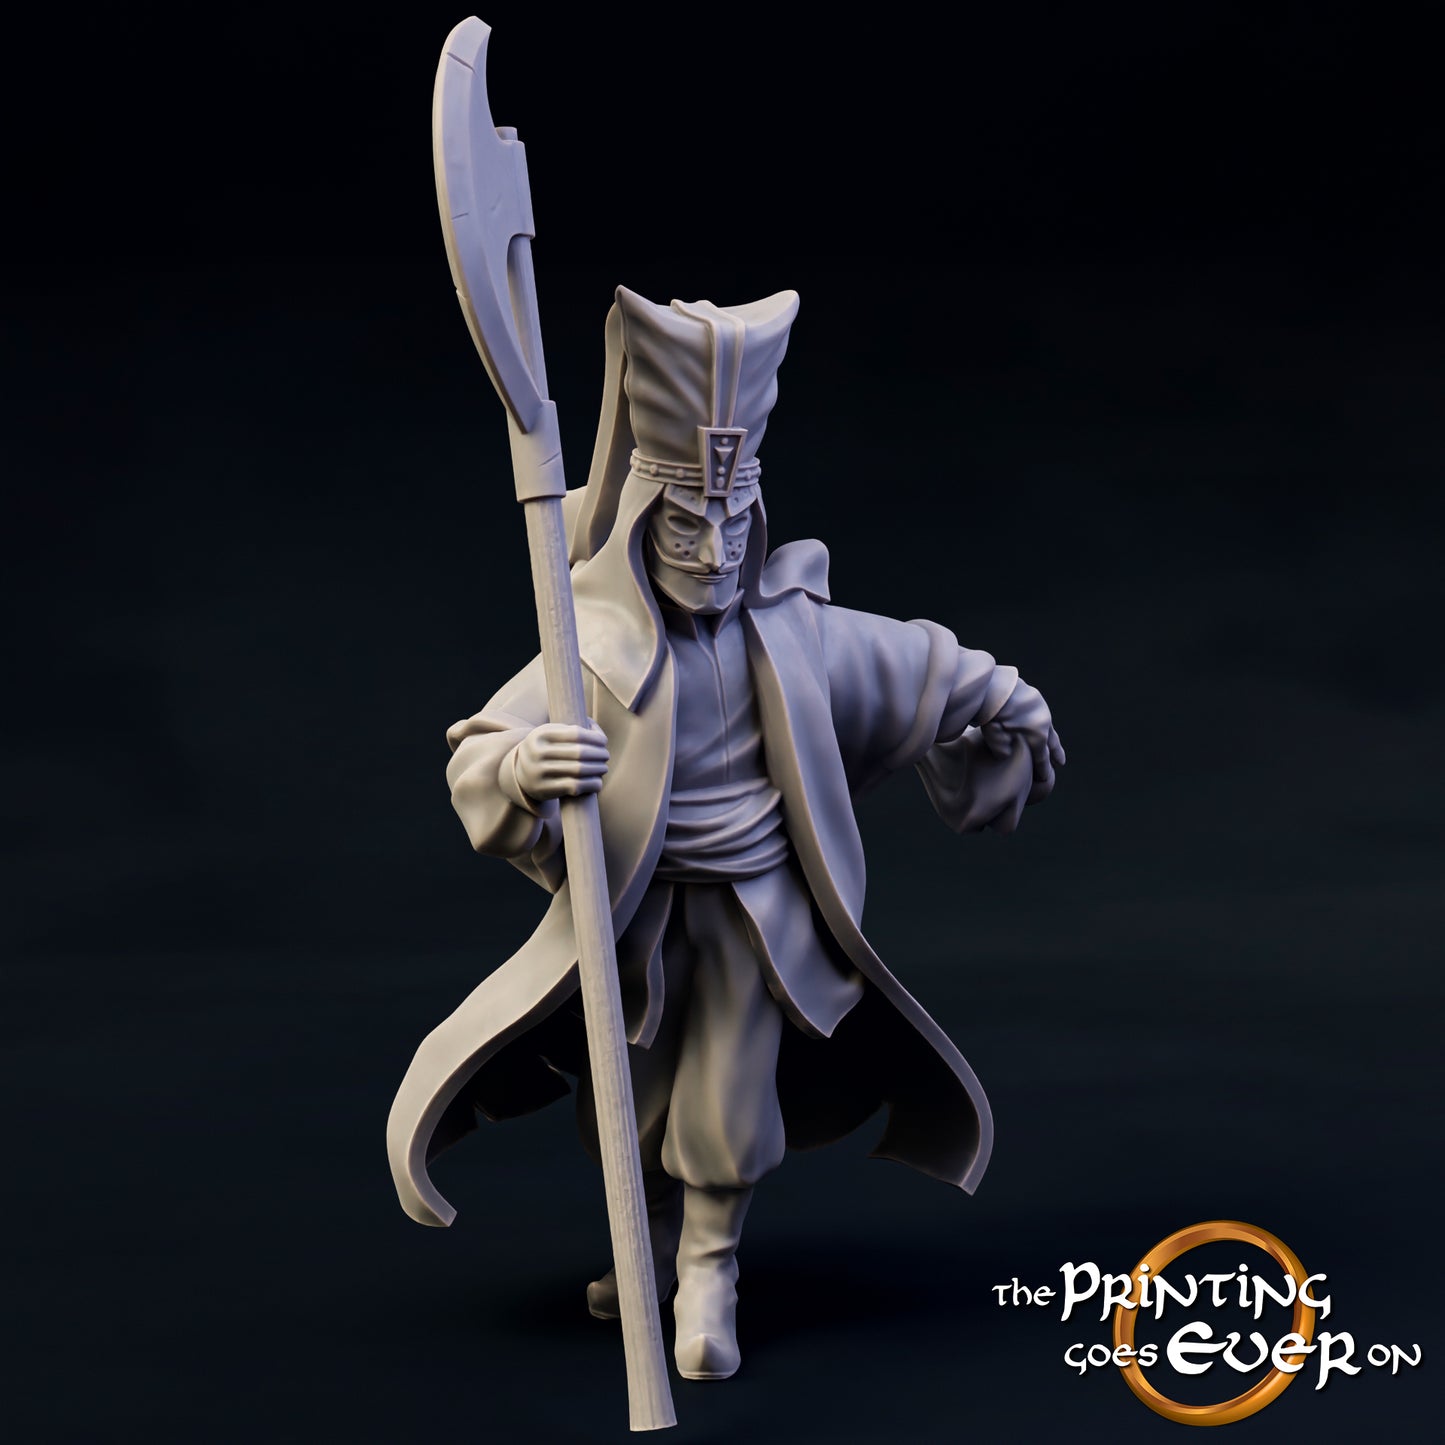 Dark Sorcerer by The Printing Goes Ever On